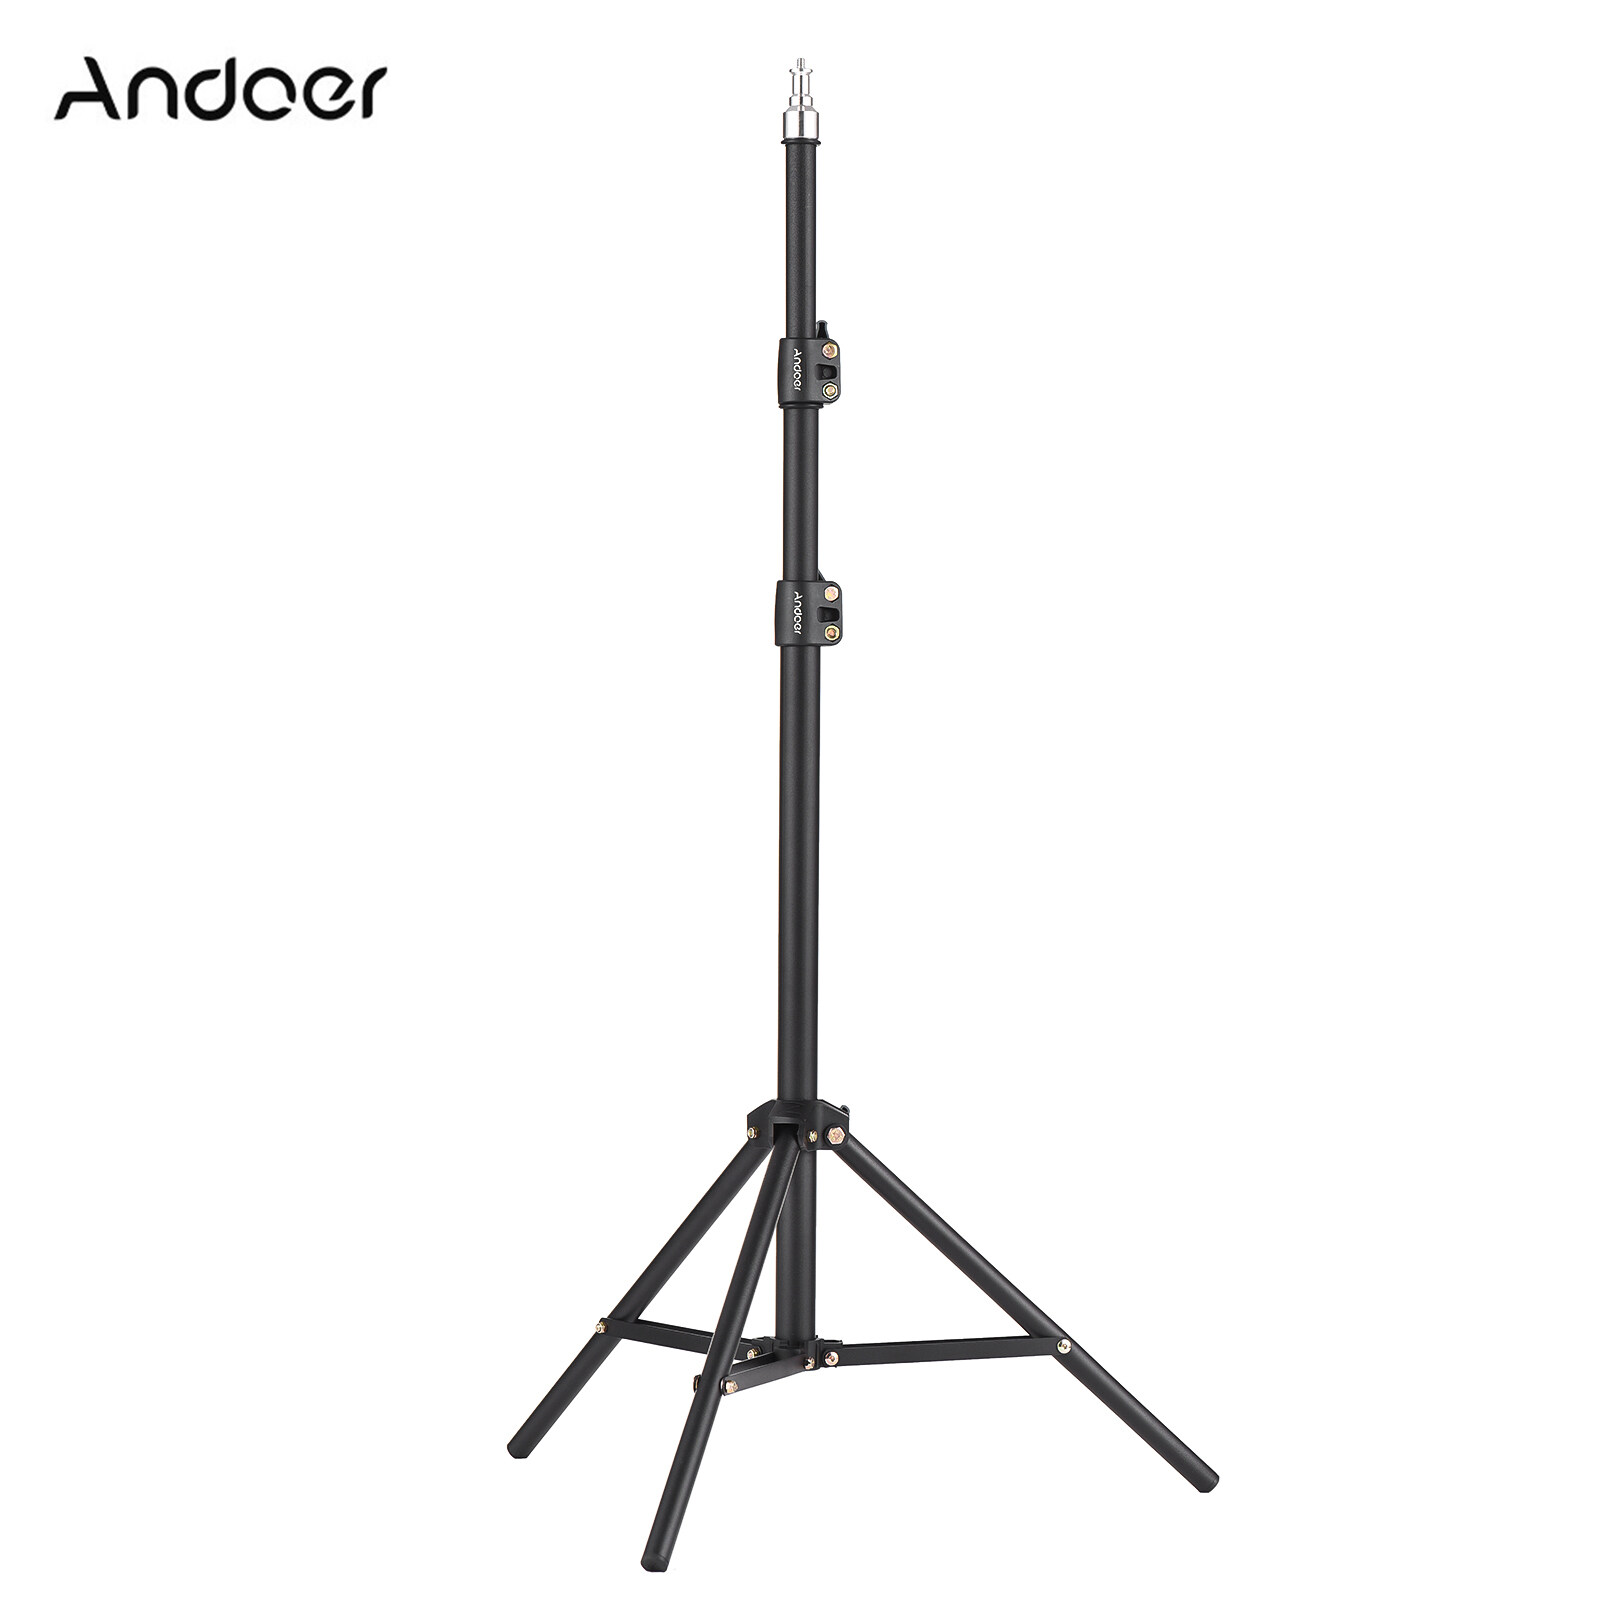 Andoer 160cm 63in Portable Metal Light Stand Heavy Duty Adjustable